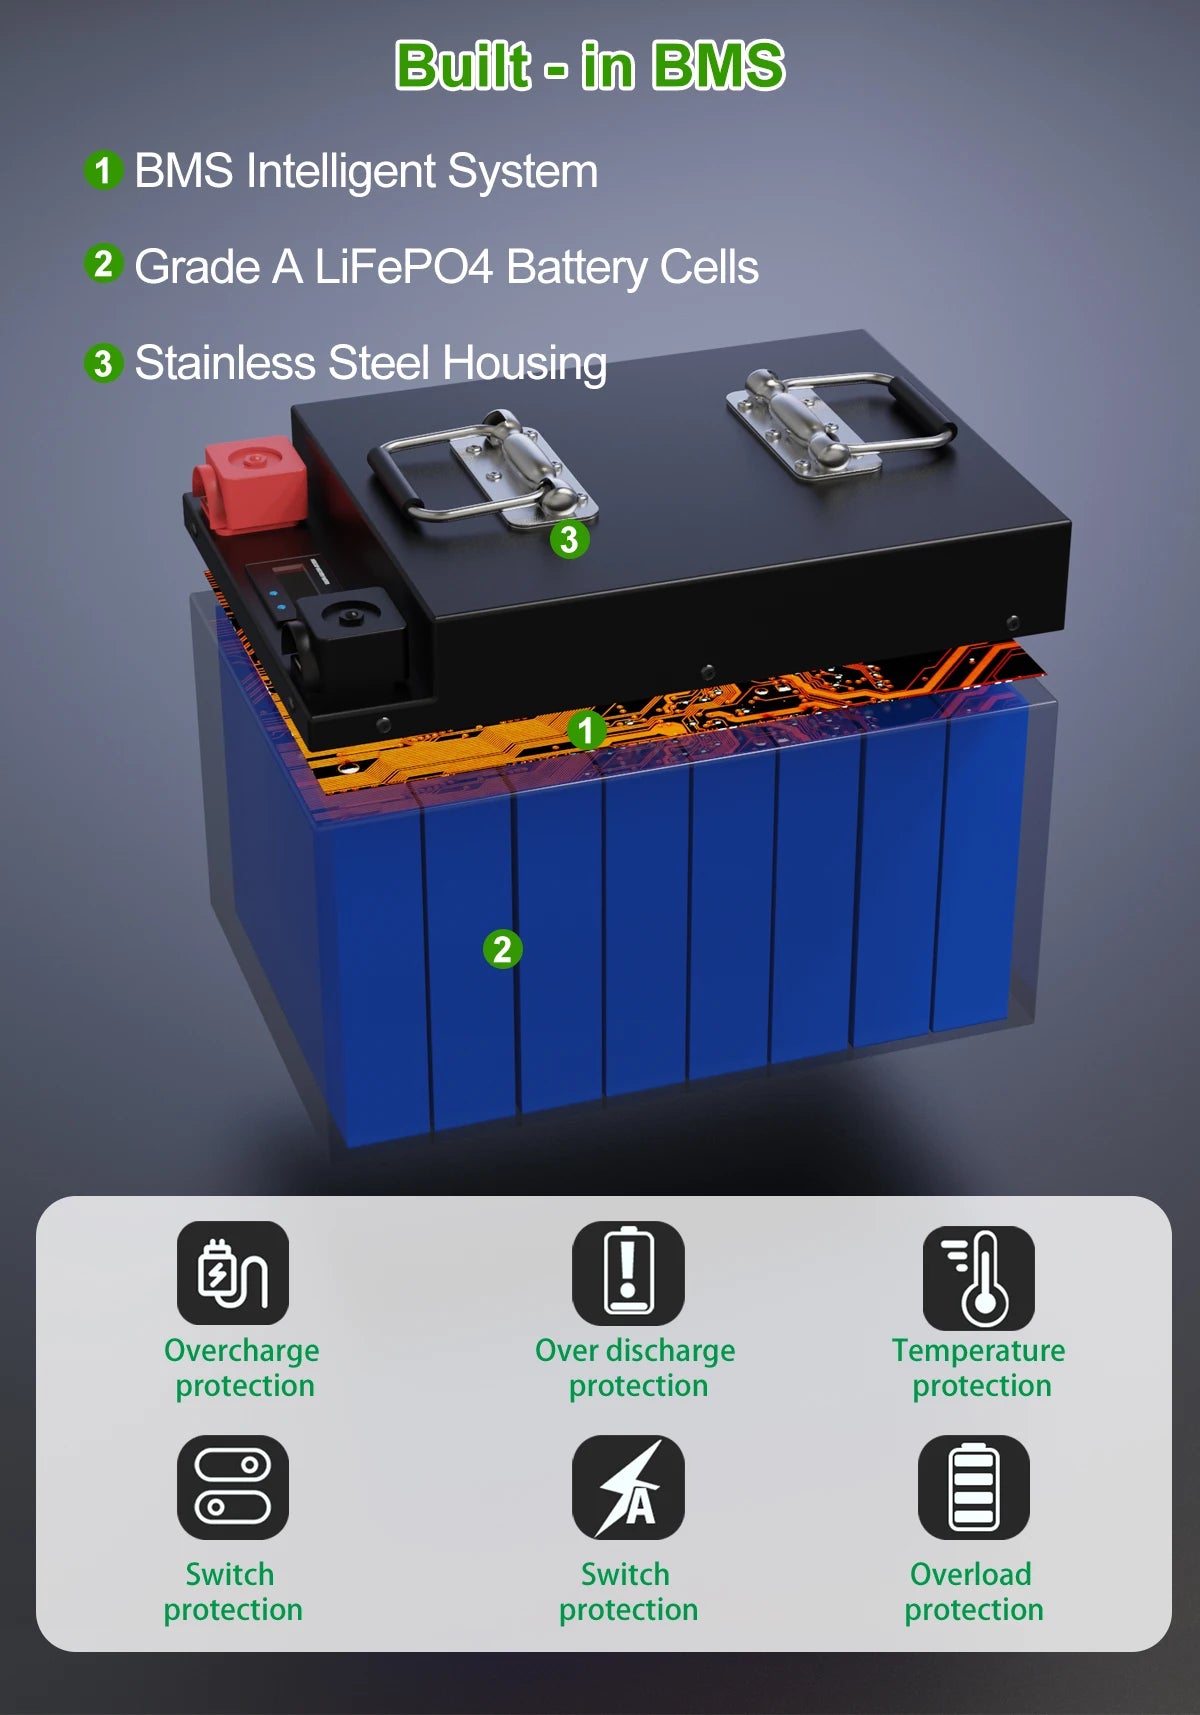 LiFePO4 24V 300Ah 200Ah 100Ah Battery, Intelligent battery management system protects LiFePO4 cells in stainless steel housing from damage.